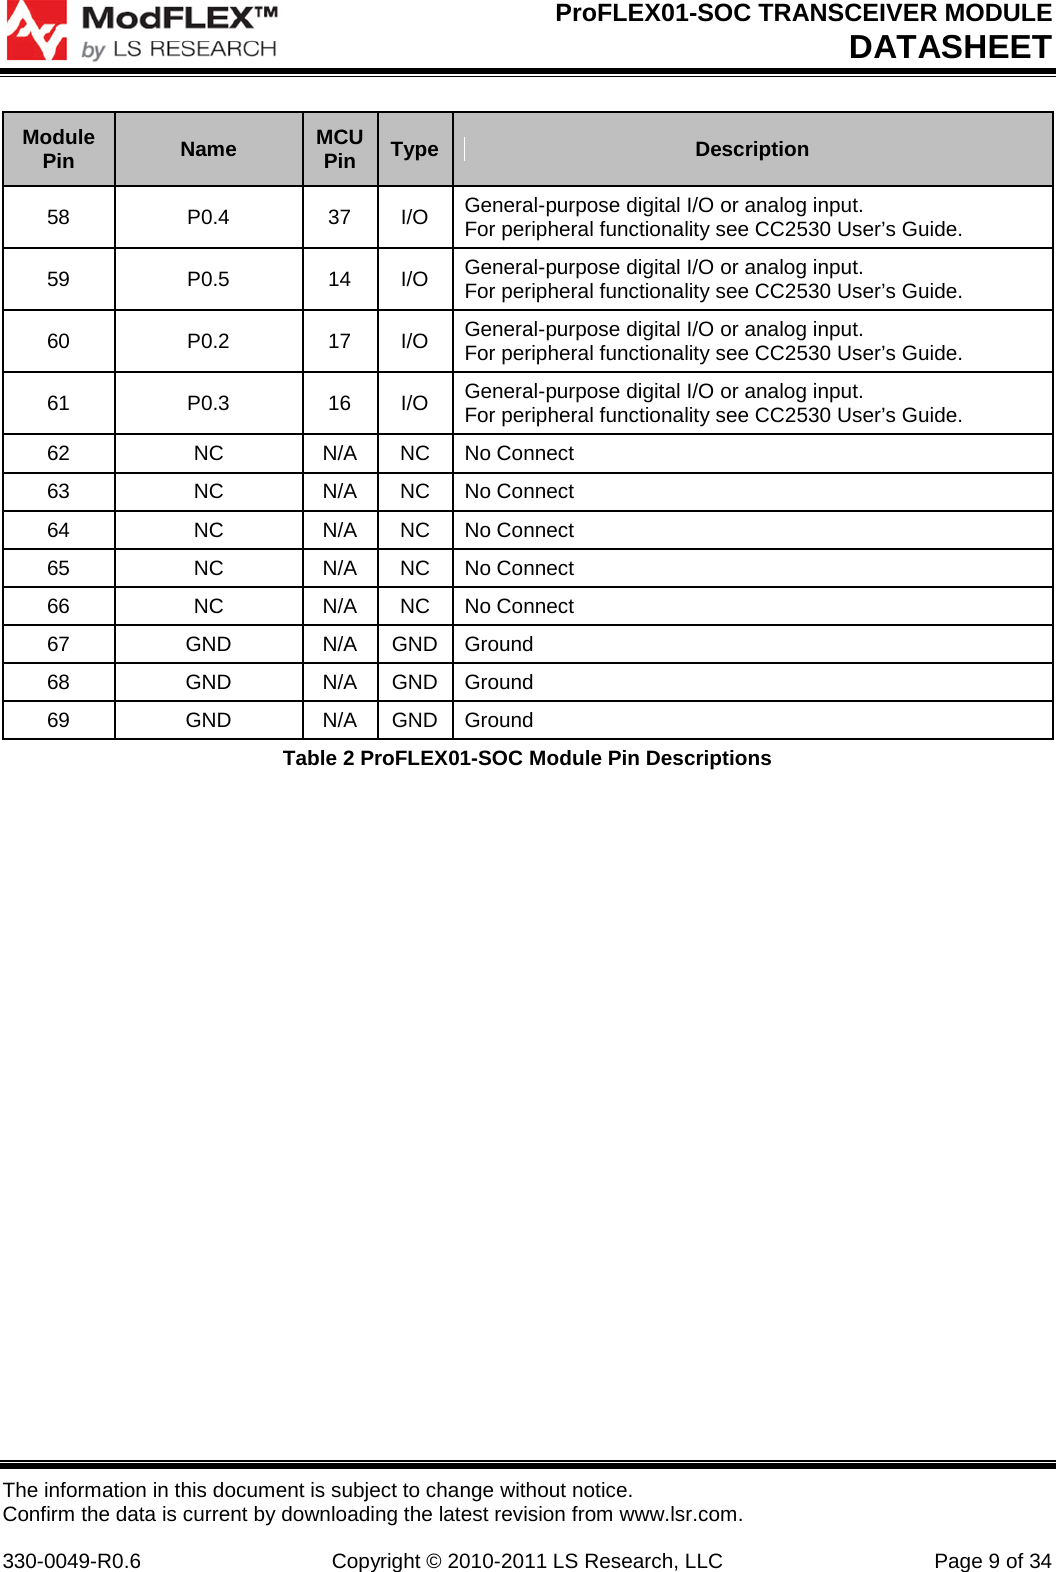 ProFLEX01-SOC TRANSCEIVER MODULE DATASHEET The information in this document is subject to change without notice. Confirm the data is current by downloading the latest revision from www.lsr.com.  330-0049-R0.6 Copyright © 2010-2011 LS Research, LLC Page 9 of 34 Module Pin Name MCU Pin Type Description 58 P0.4 37 I/O General-purpose digital I/O or analog input. For peripheral functionality see CC2530 User’s Guide. 59 P0.5 14 I/O General-purpose digital I/O or analog input. For peripheral functionality see CC2530 User’s Guide. 60 P0.2 17 I/O General-purpose digital I/O or analog input. For peripheral functionality see CC2530 User’s Guide. 61  P0.3 16 I/O General-purpose digital I/O or analog input. For peripheral functionality see CC2530 User’s Guide. 62 NC N/A NC No Connect 63 NC N/A NC No Connect 64 NC N/A NC No Connect 65 NC N/A NC No Connect 66 NC N/A NC No Connect 67 GND N/A GND Ground 68 GND N/A GND Ground 69 GND N/A GND Ground Table 2 ProFLEX01-SOC Module Pin Descriptions 